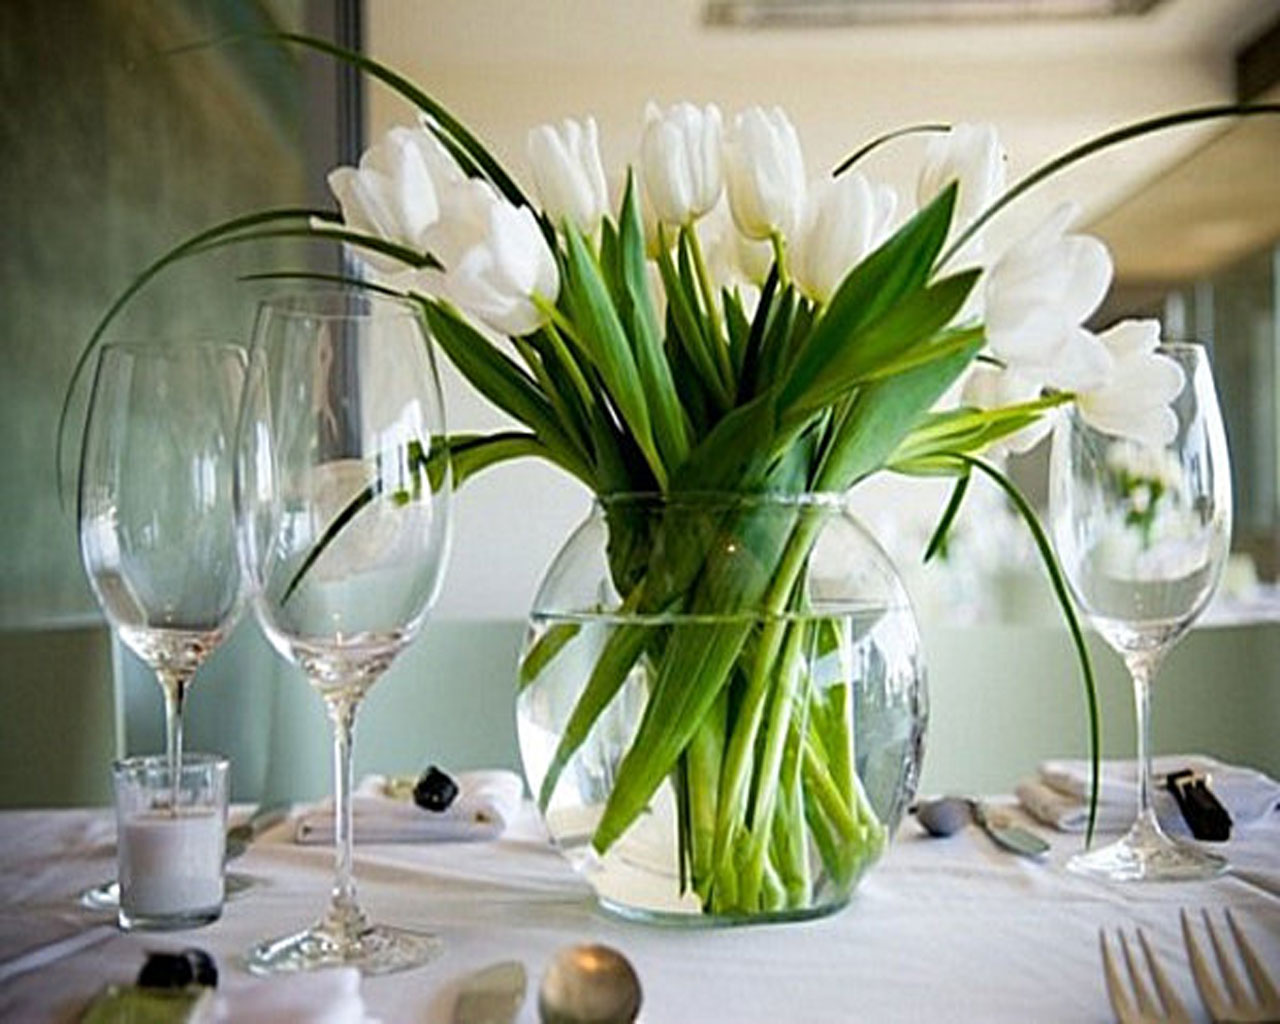 Top 21 Ideas for the Dining Table Centerpiece - Qnud